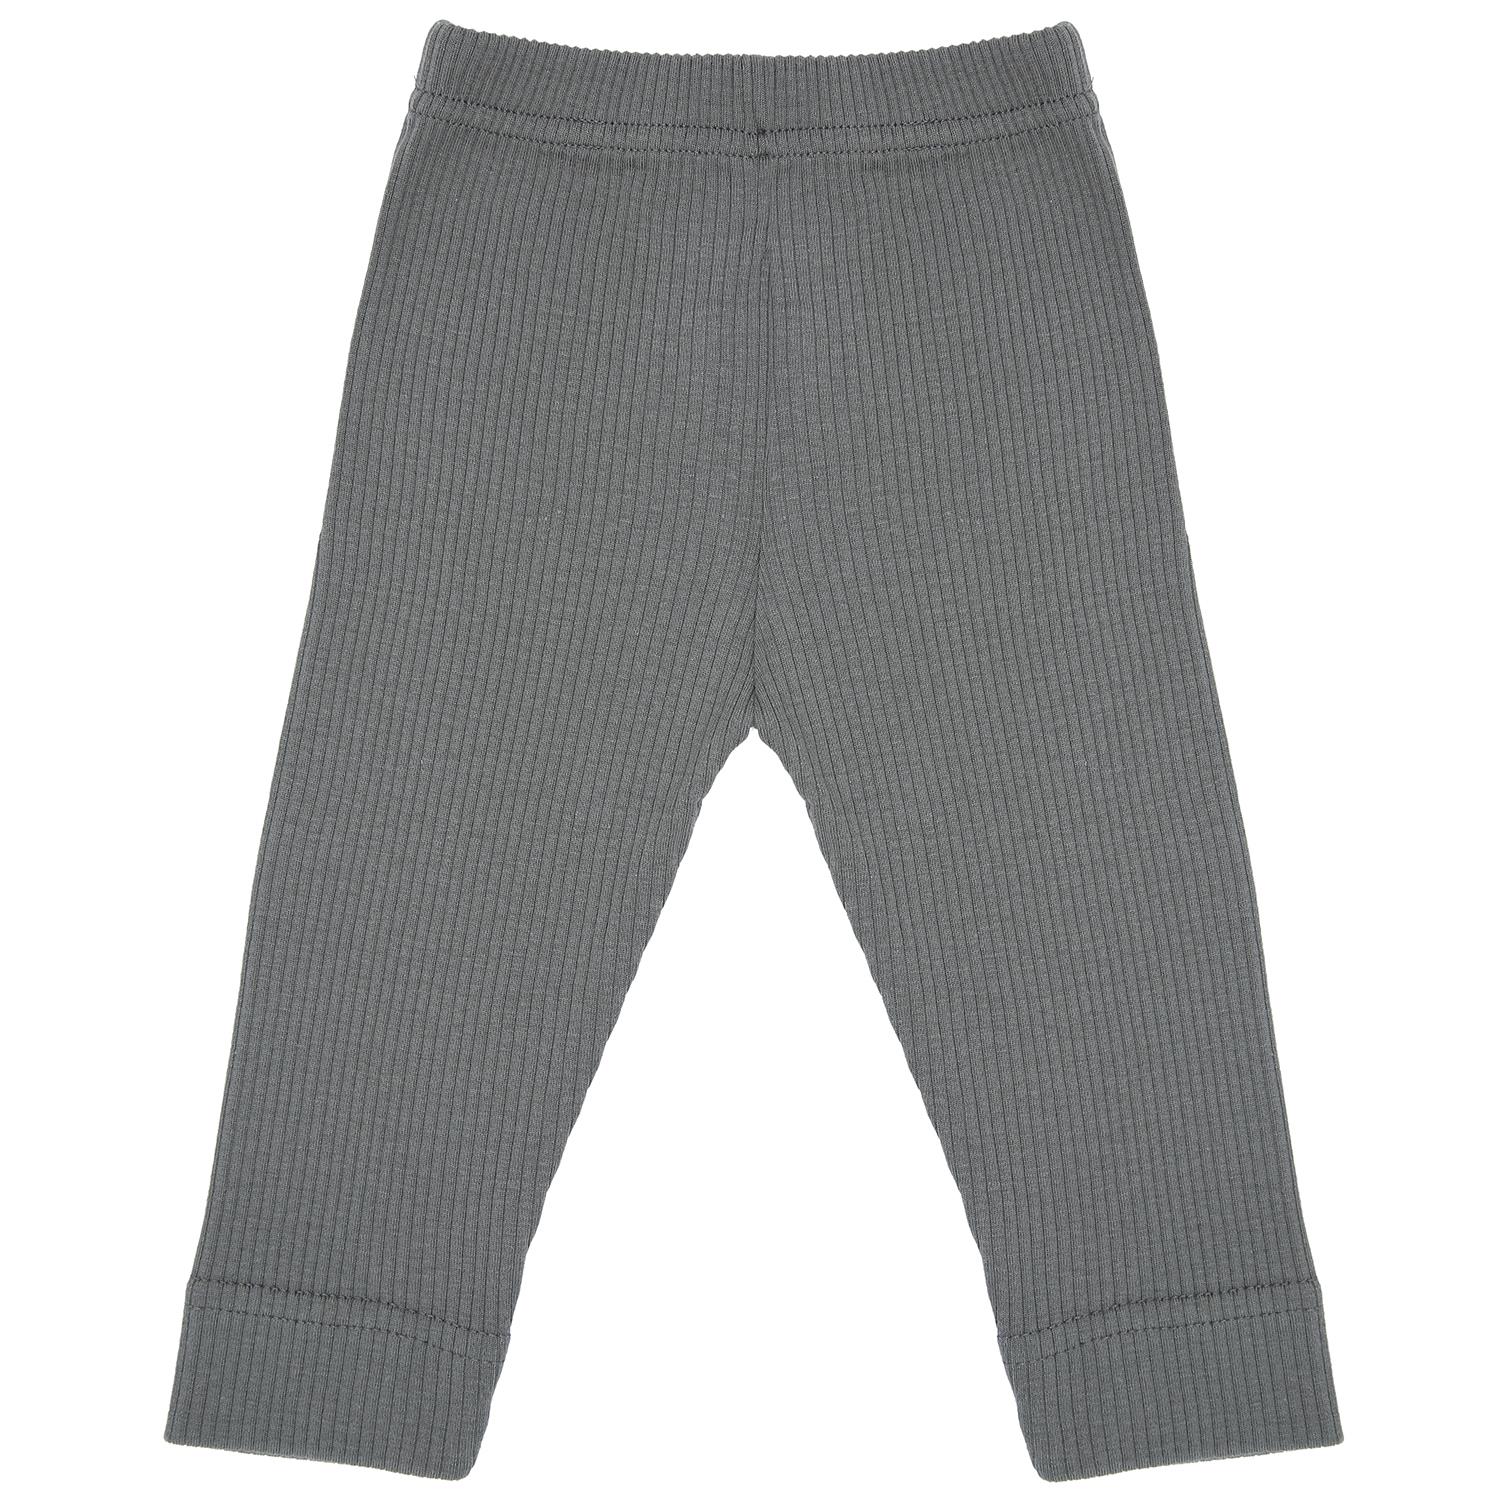 Modal Fabric Baby and Kids Trousers Leggings Gray